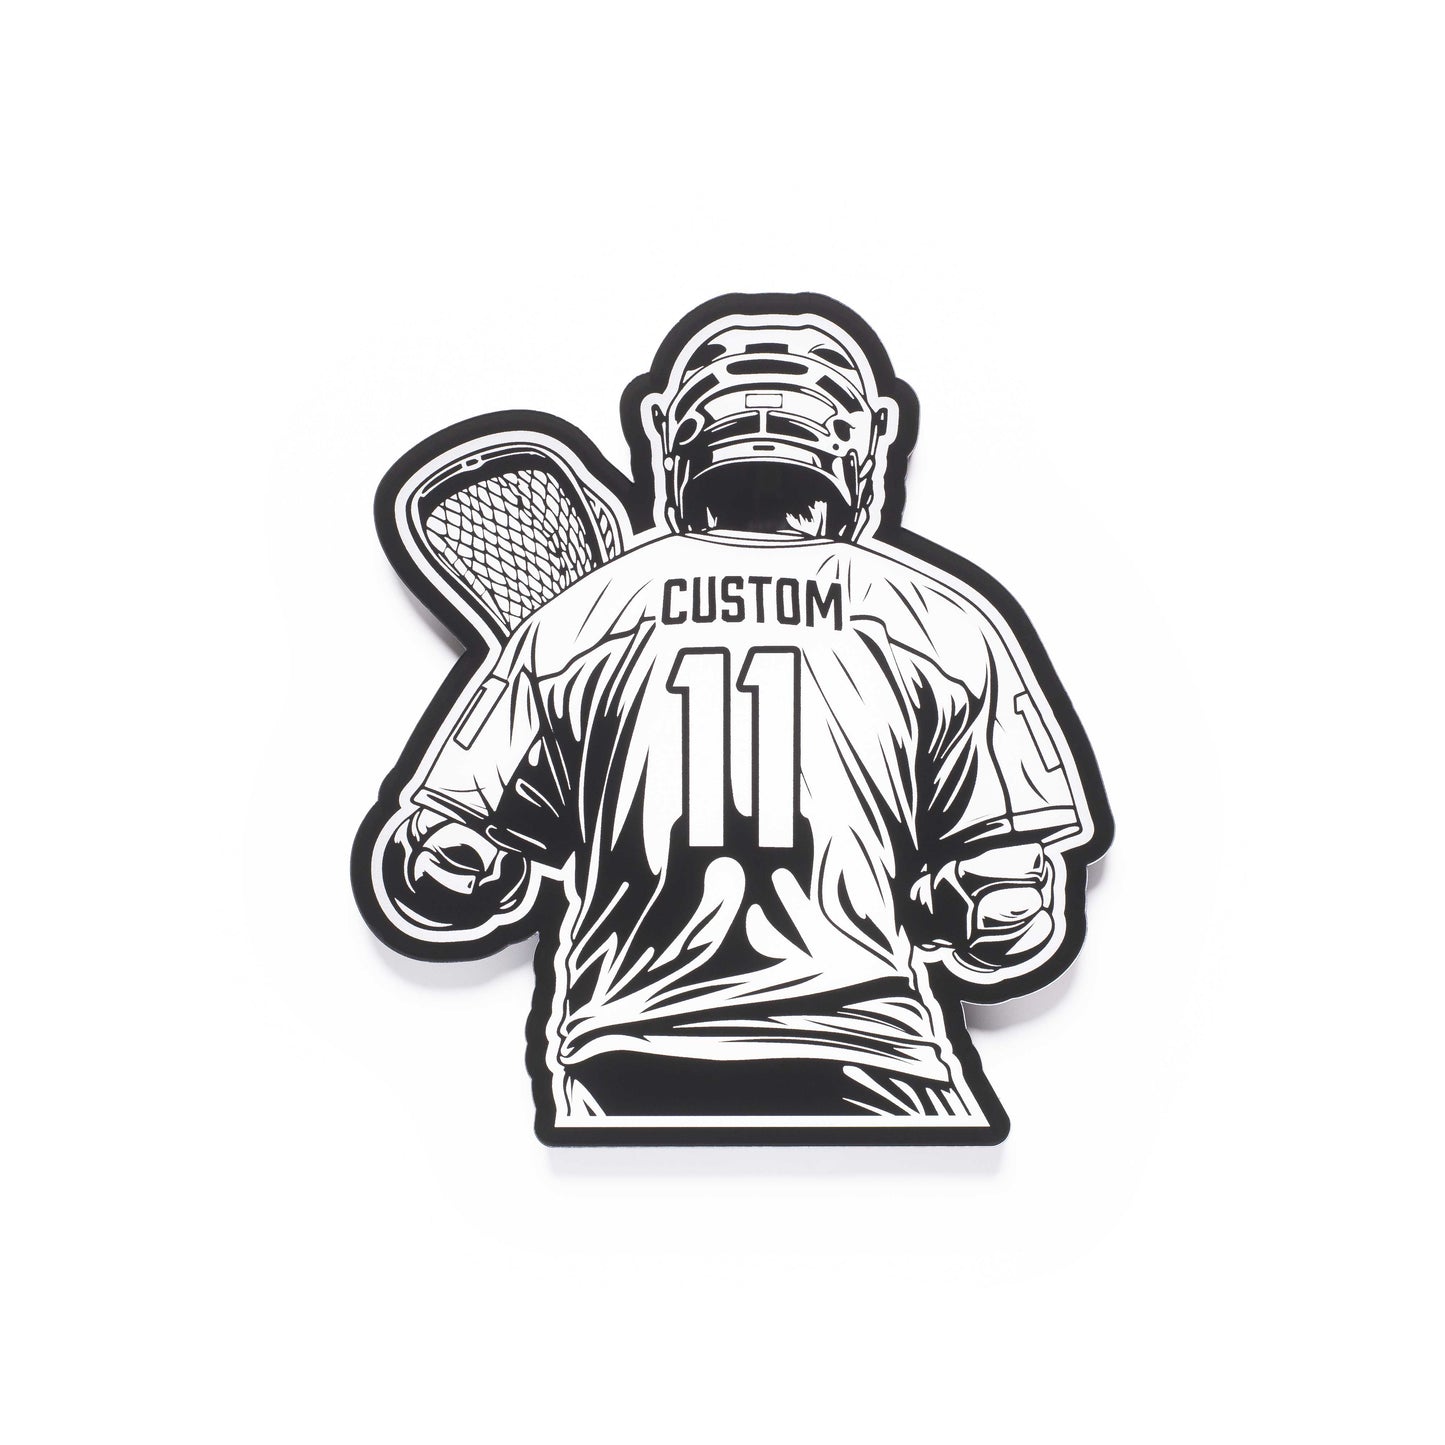 a 3d wall mounted acrylic light, back-lit by  multi-color led lights, featuring a cartoon style illustration of a lacrosse player, view from behind showing the back of the players jersey. The text and number on the back of the jersey can be personalised.